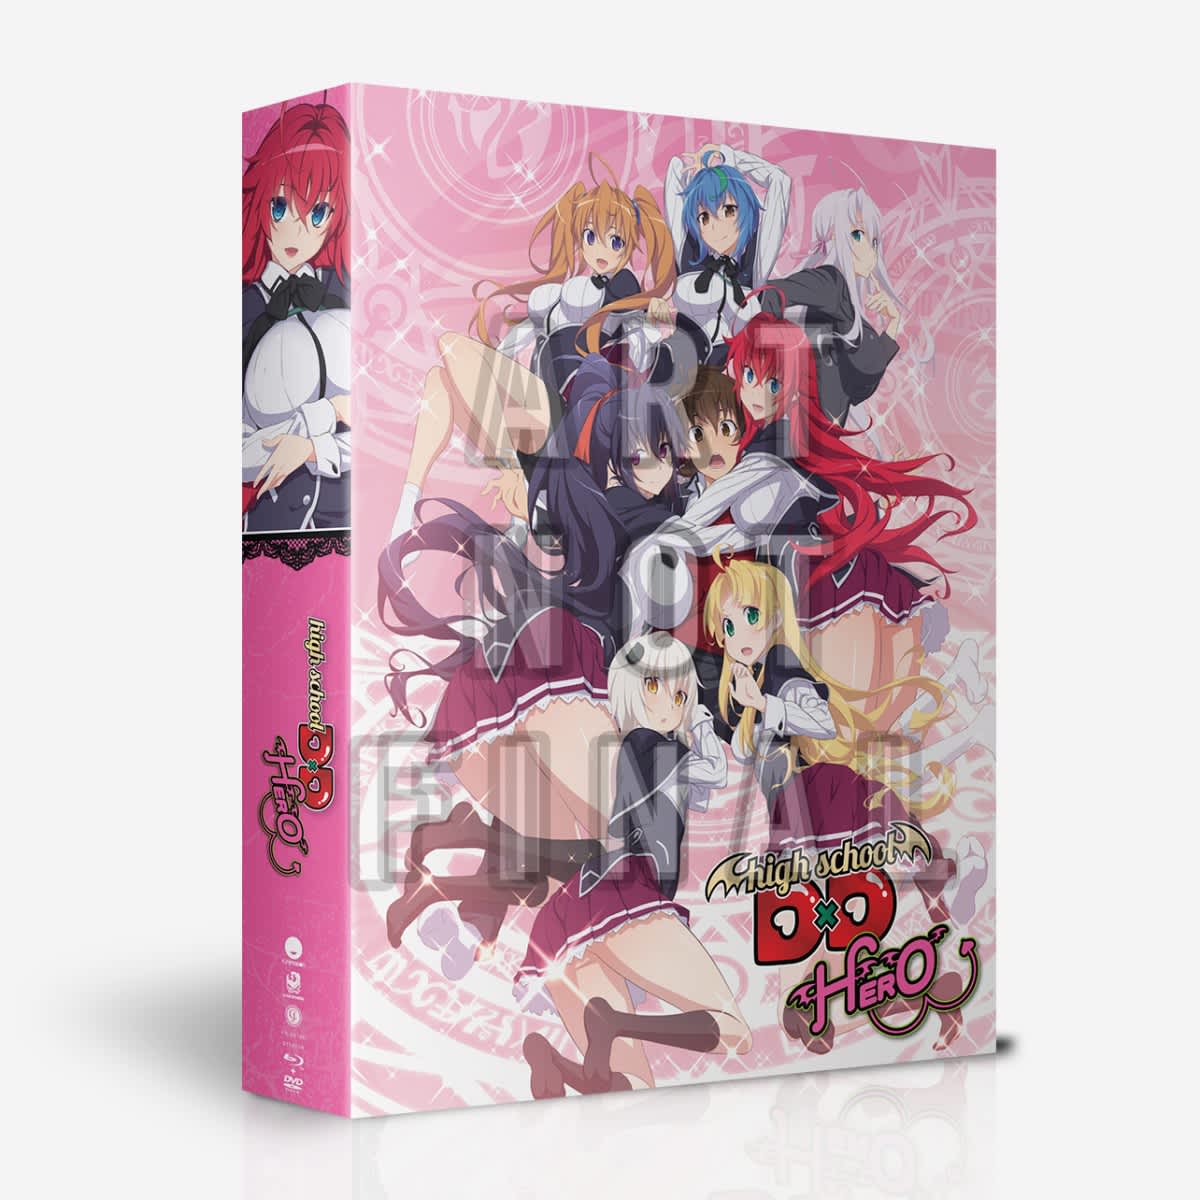 April 2019 Limited Edition Sets High School Dxd Hero Golden Kamuy Funimation Blog